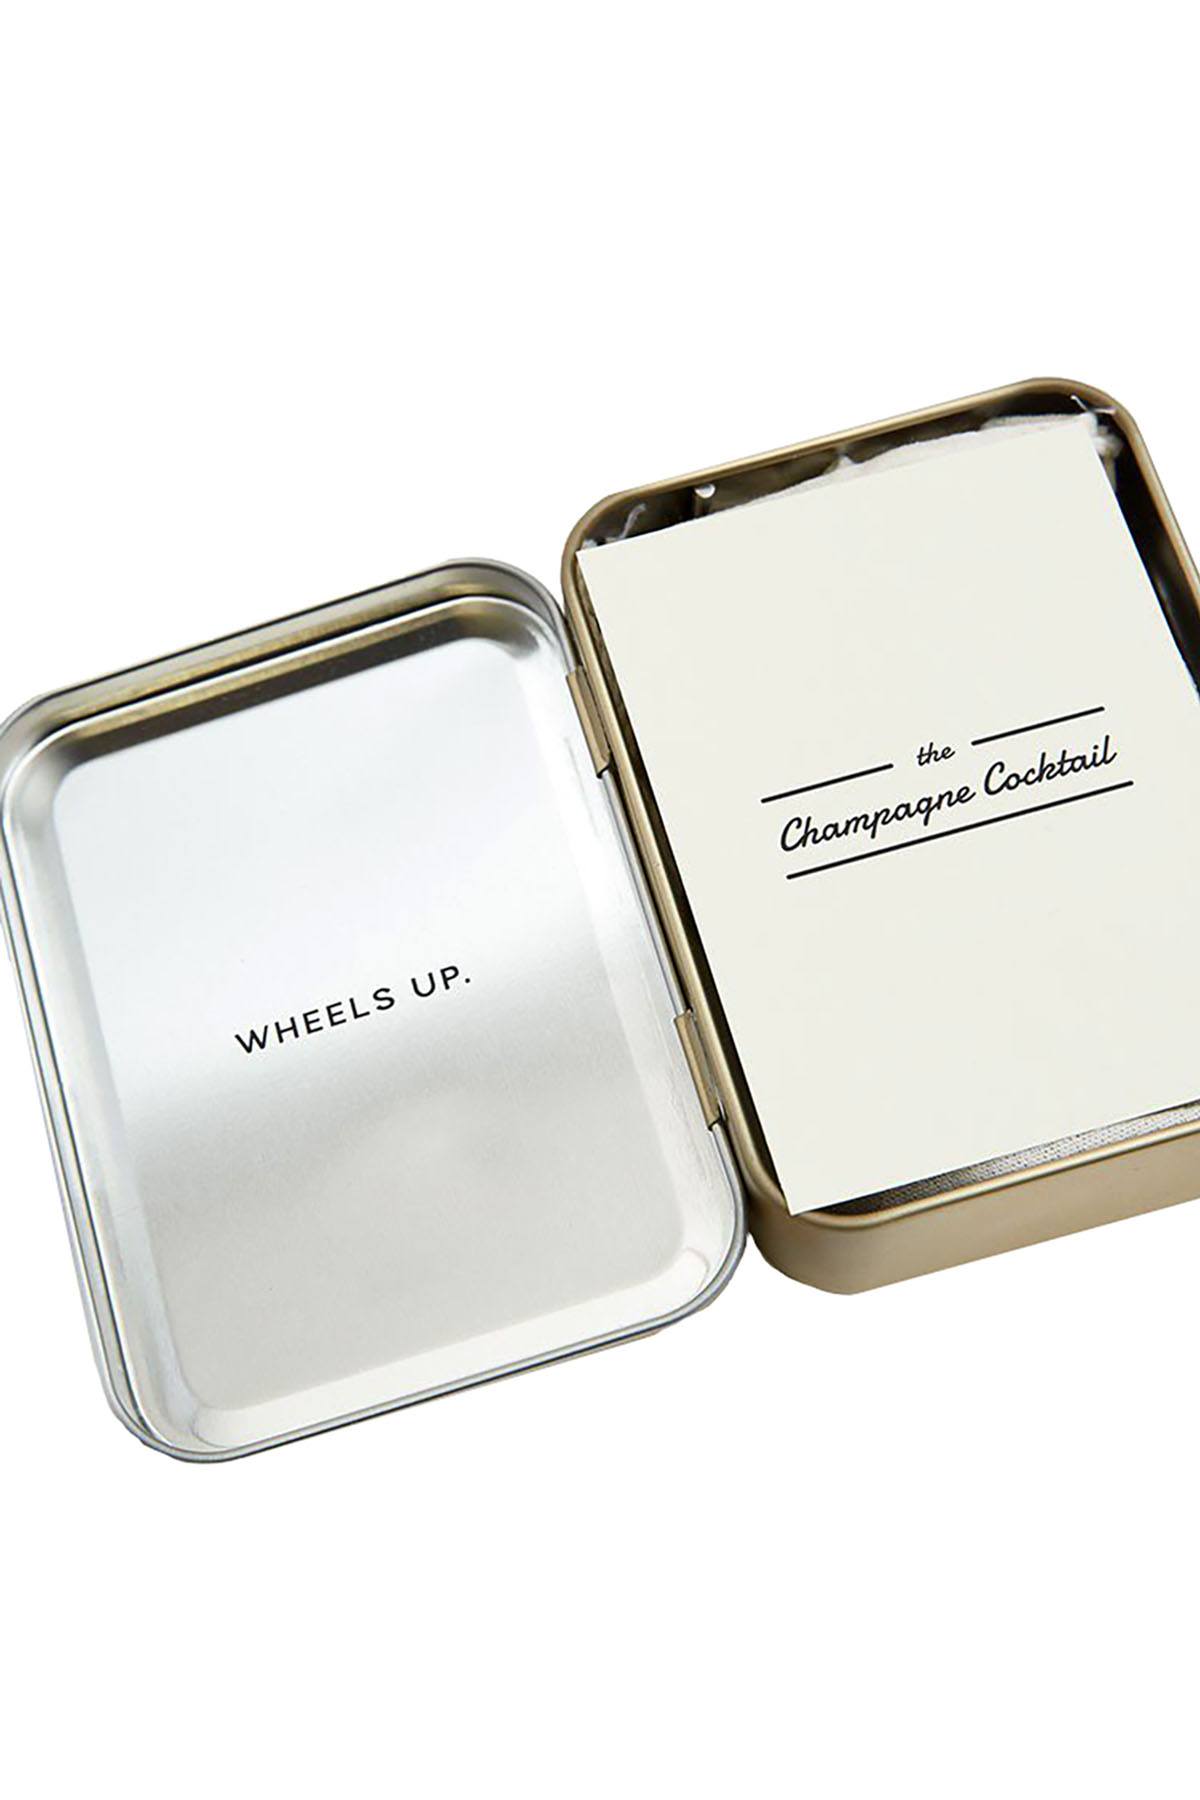 WP Design The Carry On Champagne Cocktail Kit